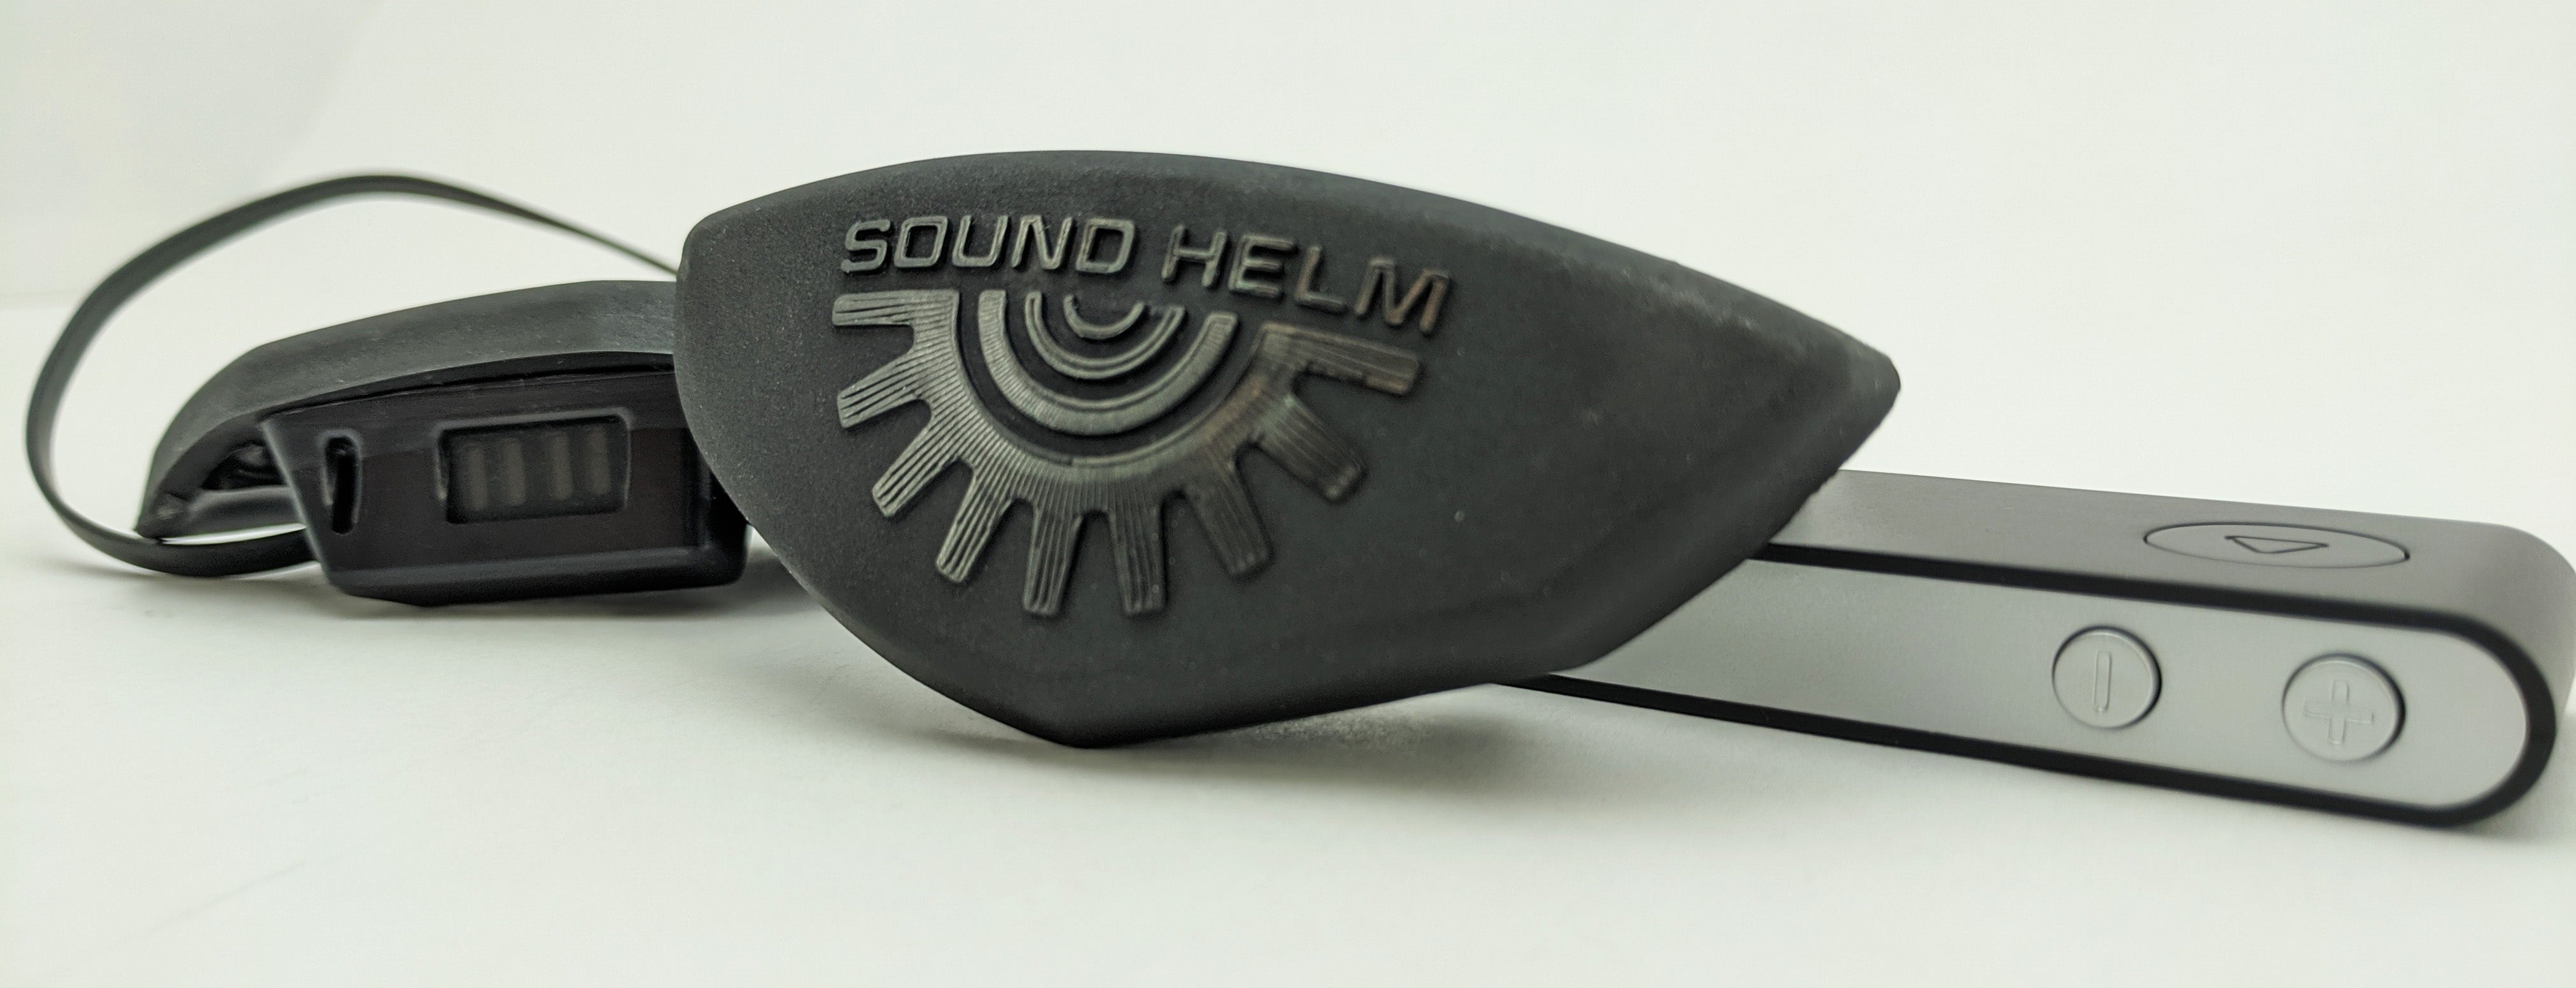 Where did the Sound Helm APHIX come from?